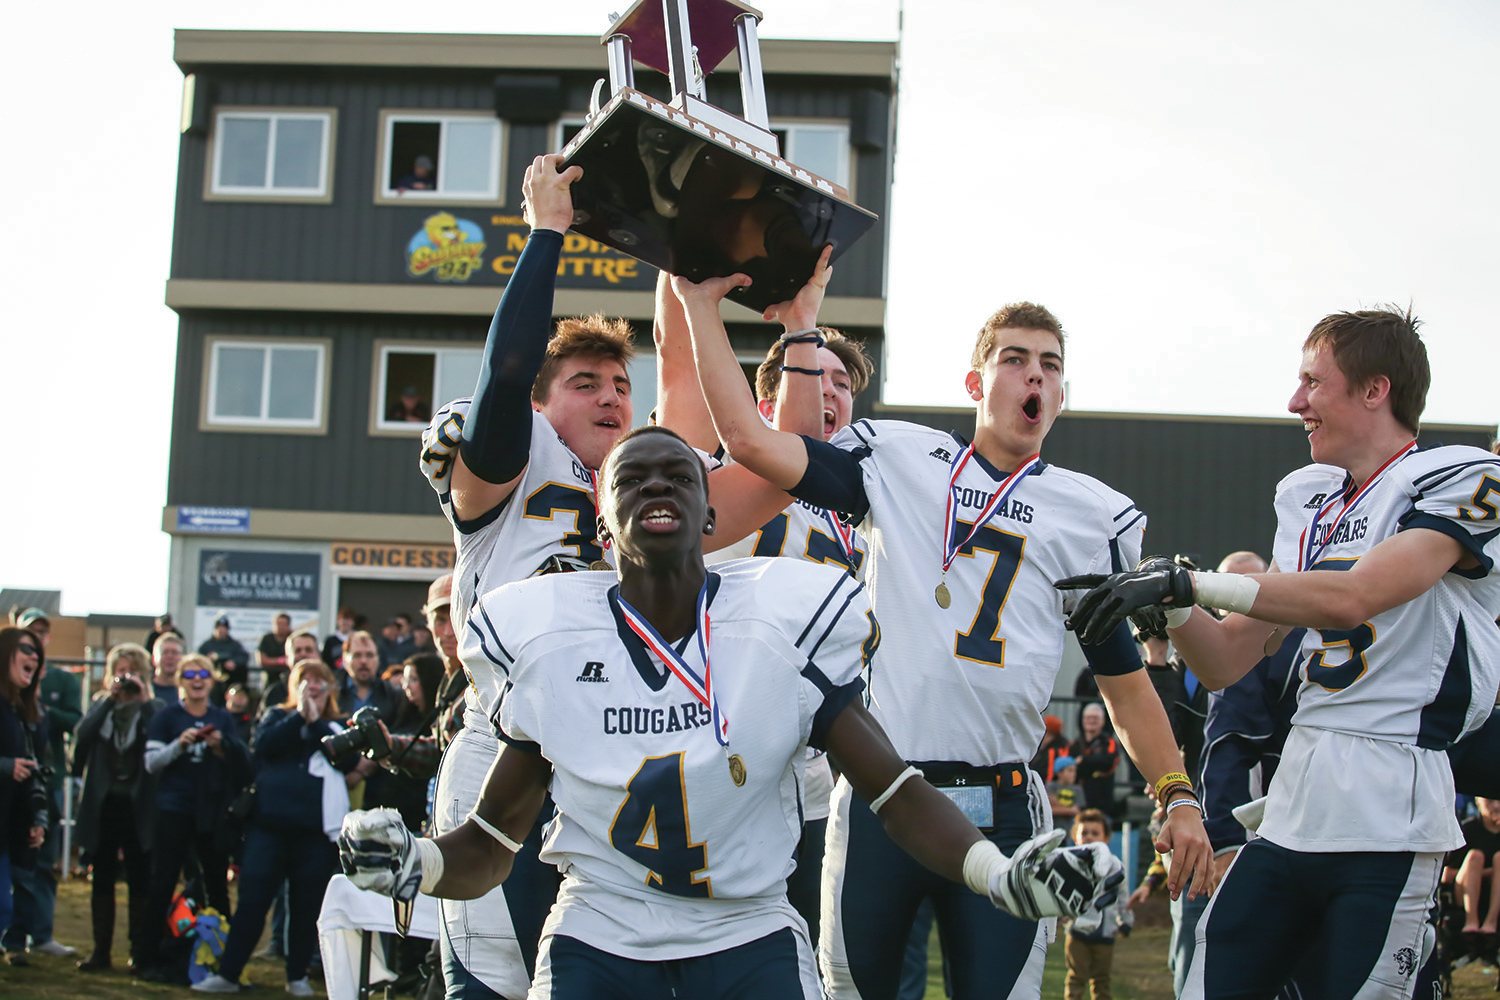 CHAMPS - The Notre Dame High School Cougars hoisted the Red Deer City title after defeating their rival Hunting Hills High School Lightning 39-15 in the Red Deer High School Football City championship at MEGlobal Athletic Park on Saturday afternoon.